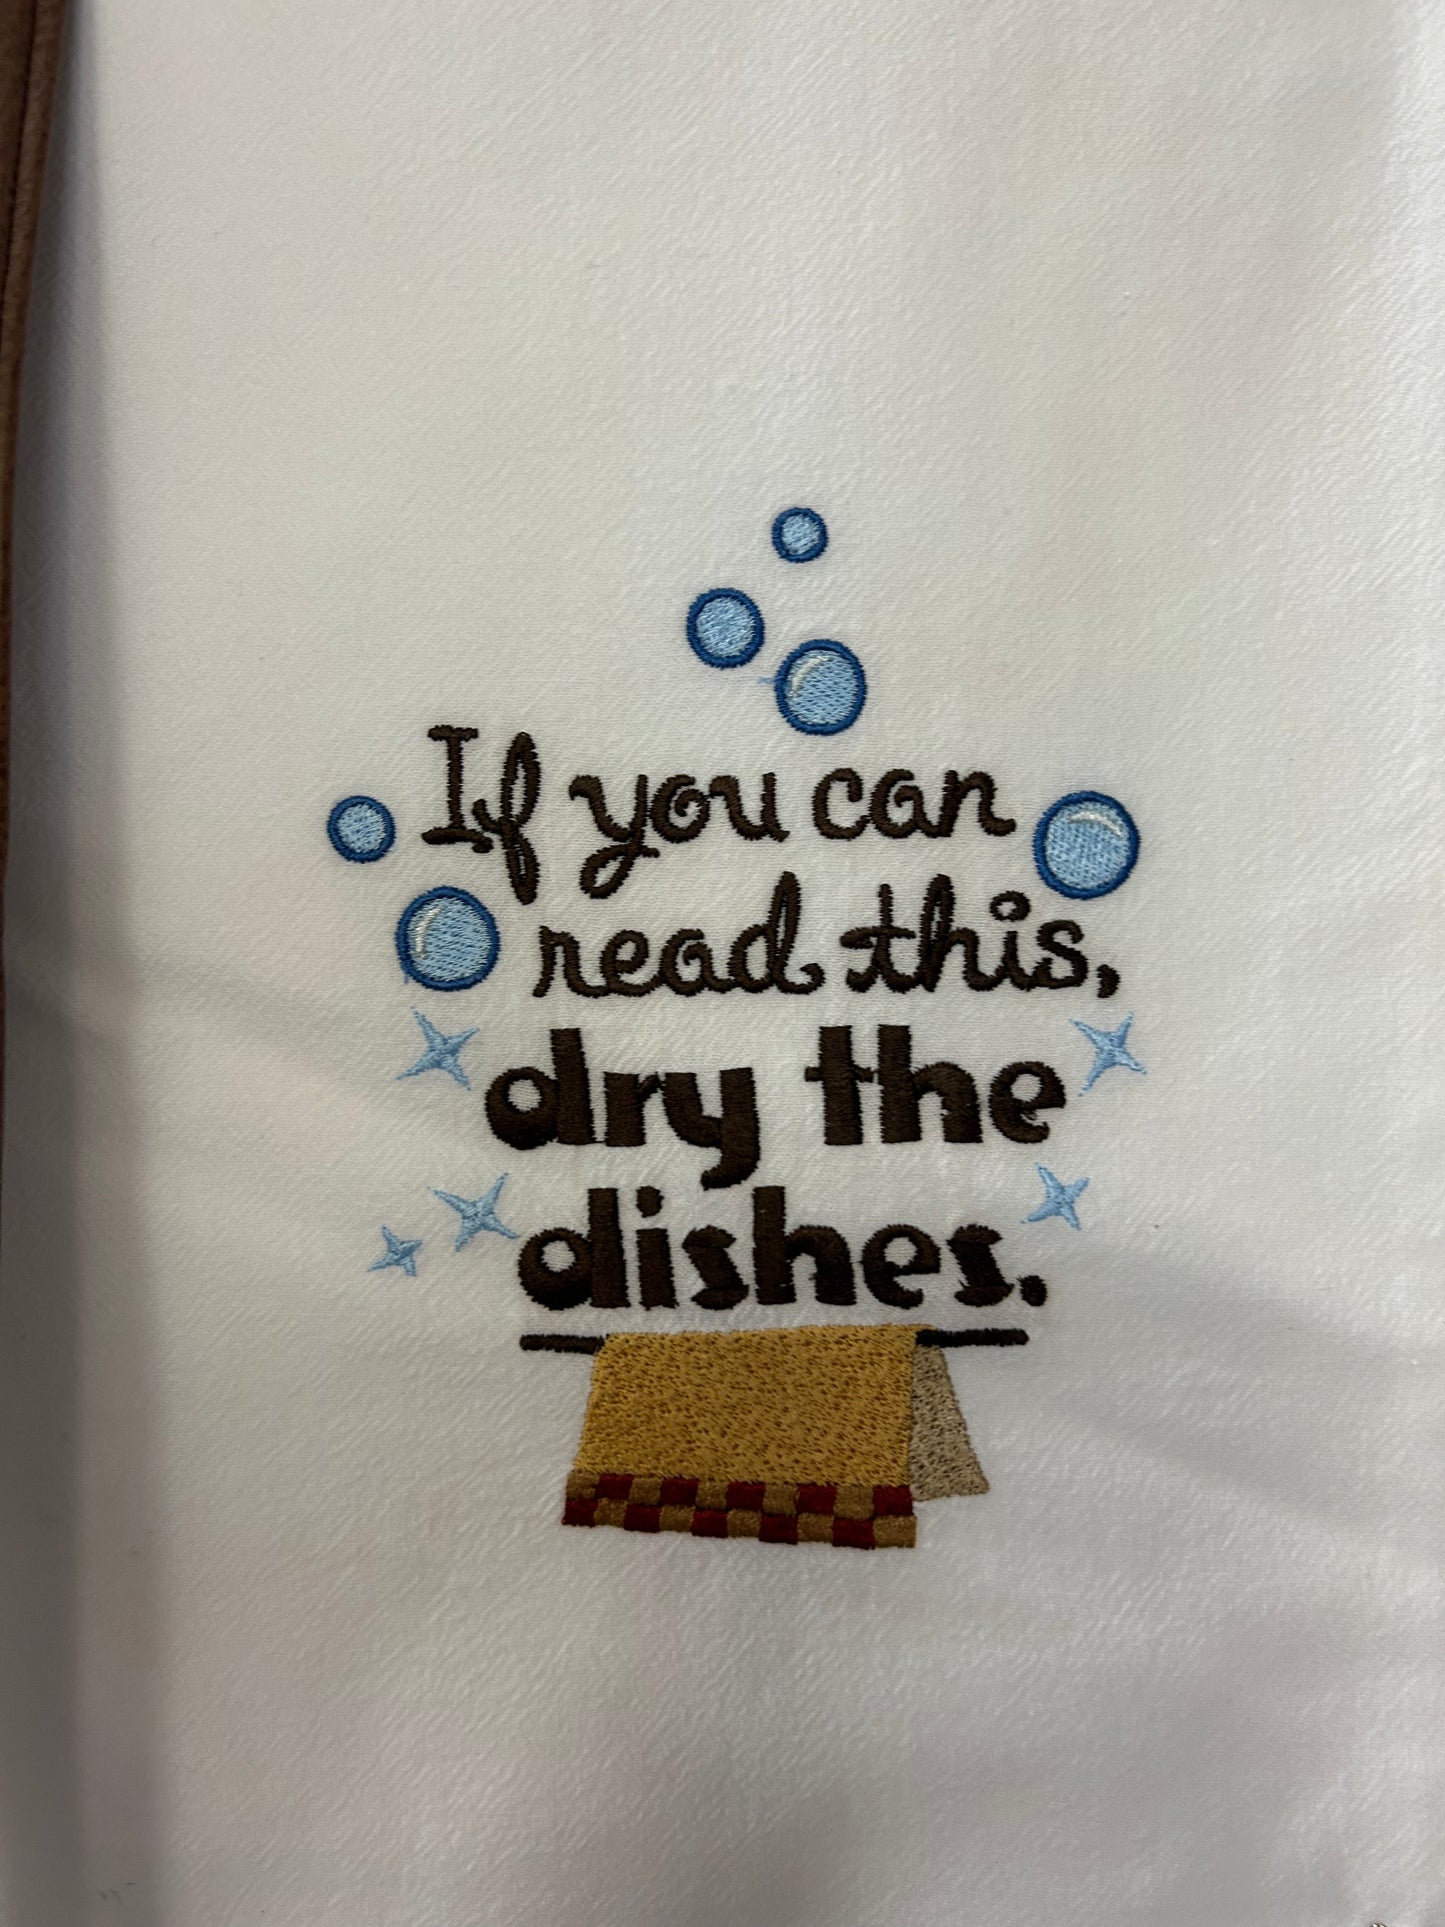 If You Can Read This Dish Towel